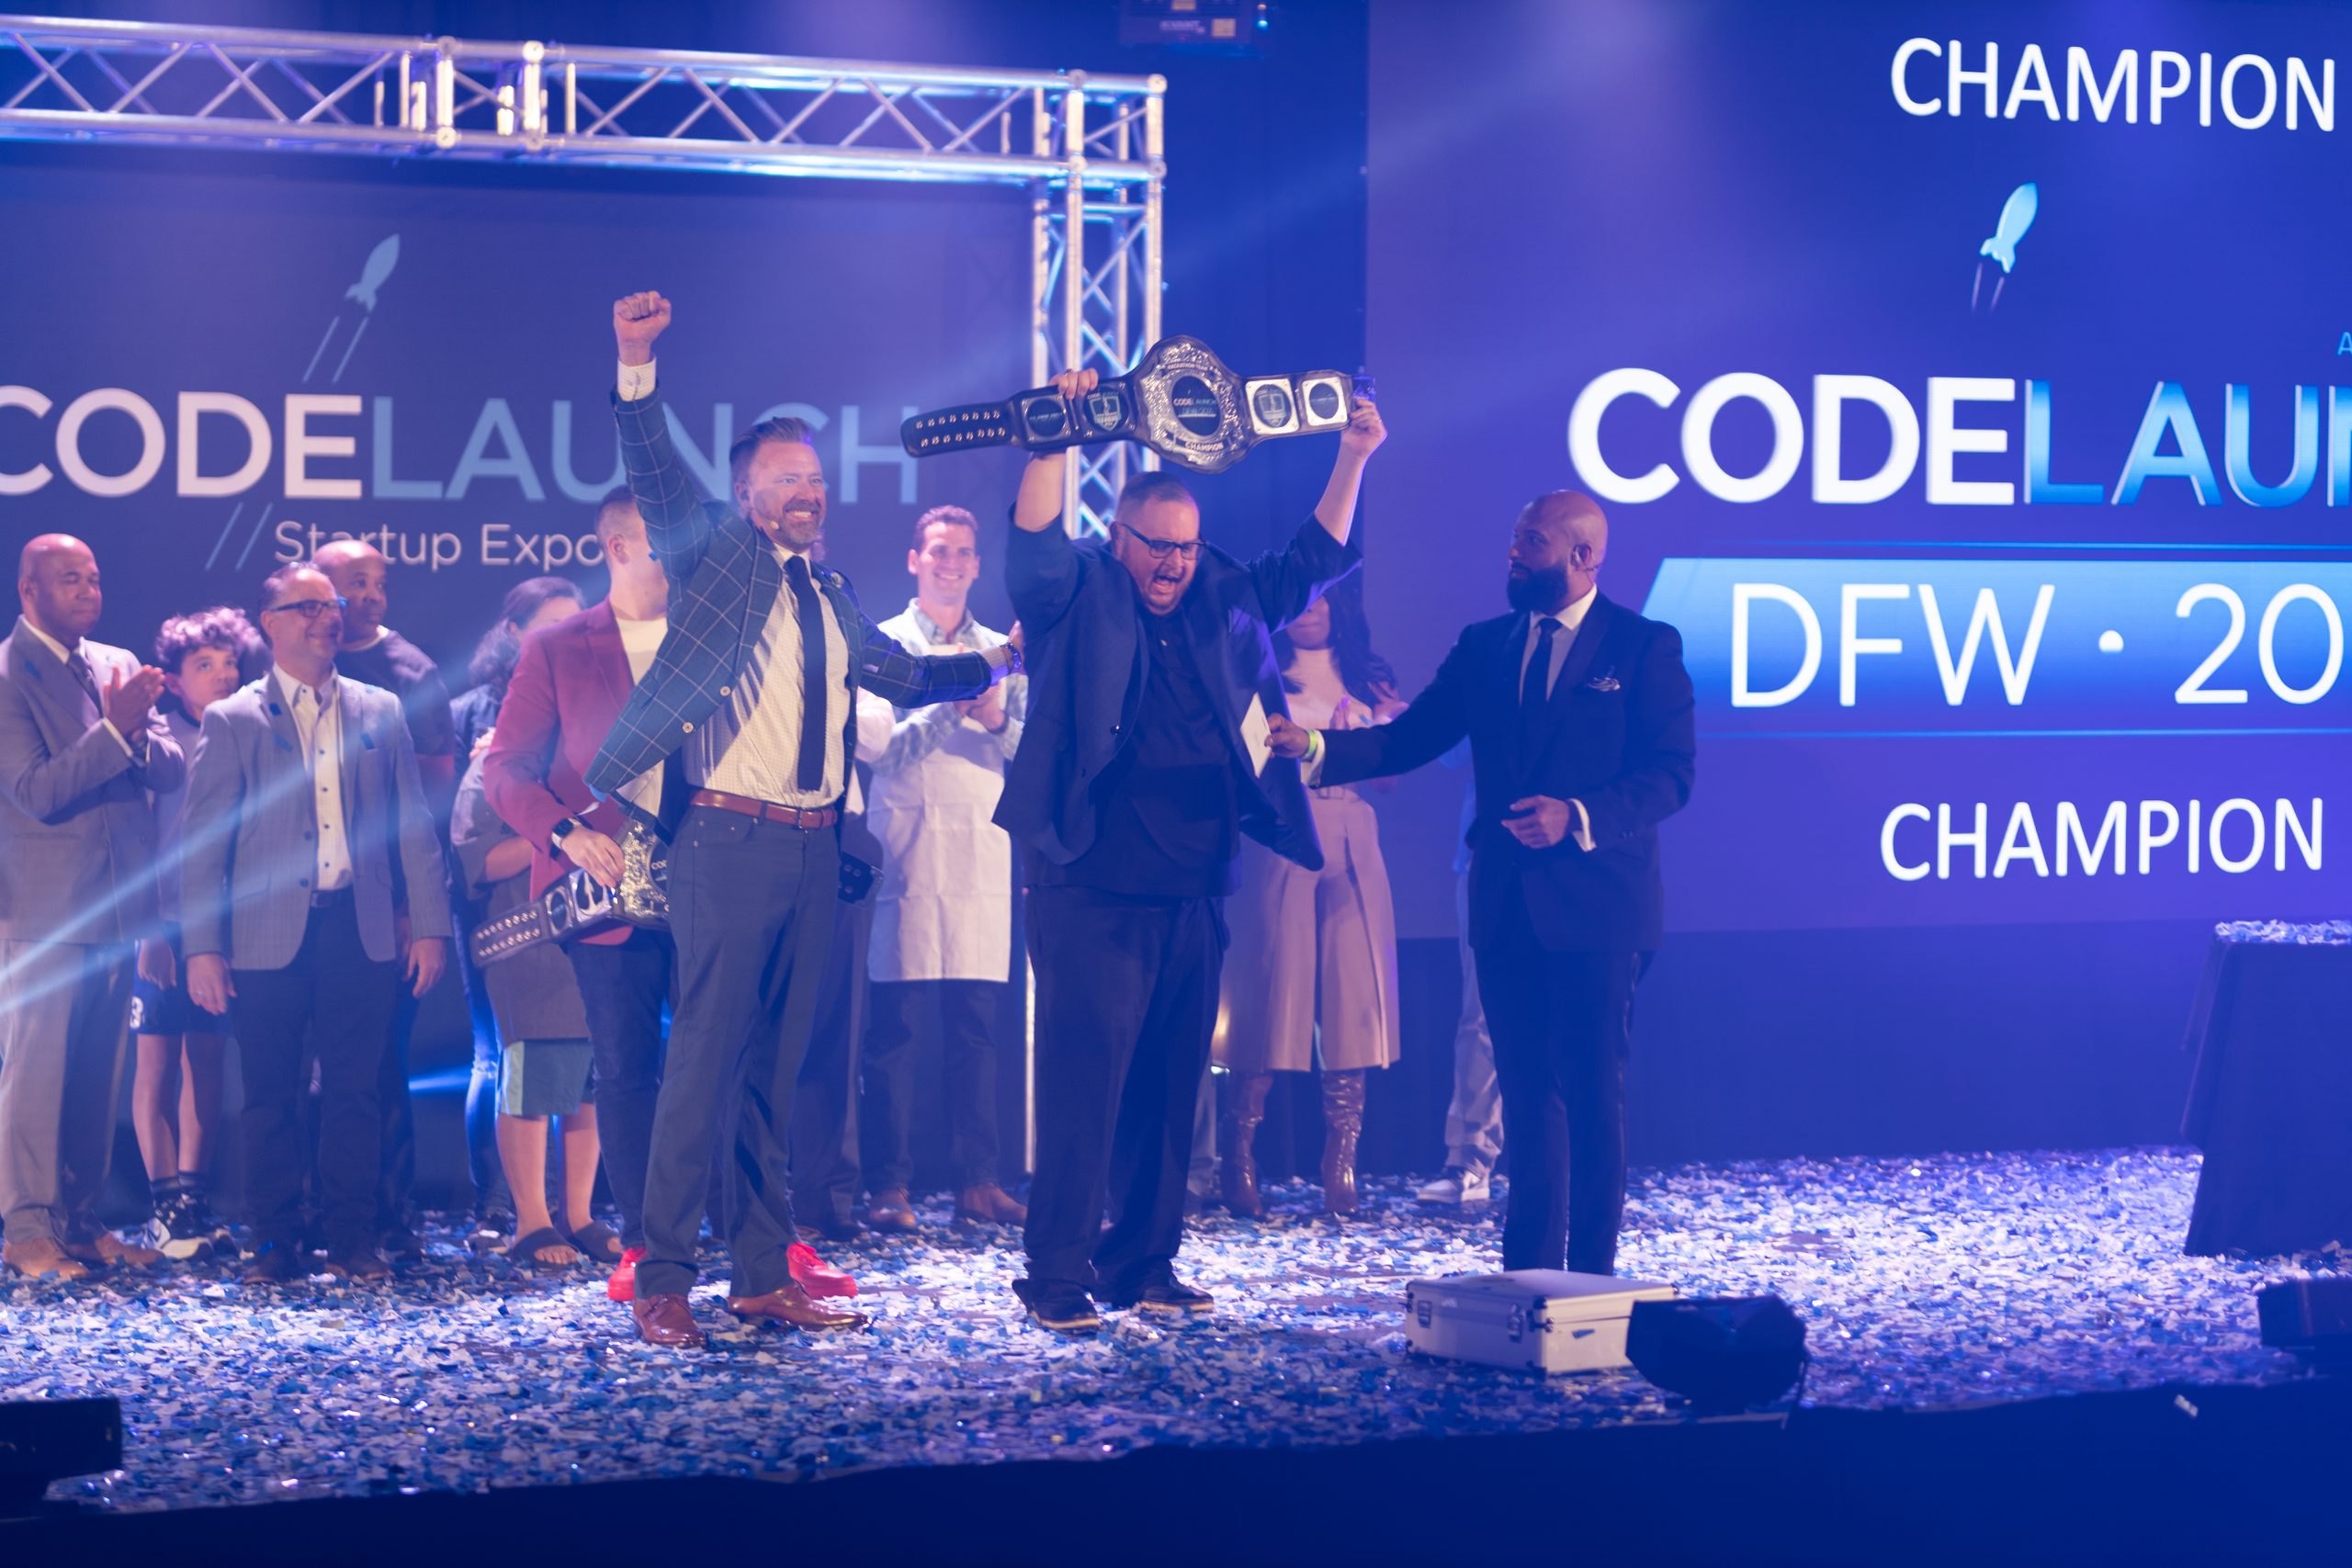 CodeLaunch Professional Hackathon Team Sponsor Leverture Reflects on Their Amazing CodeLaunch DFW 2021 Experience